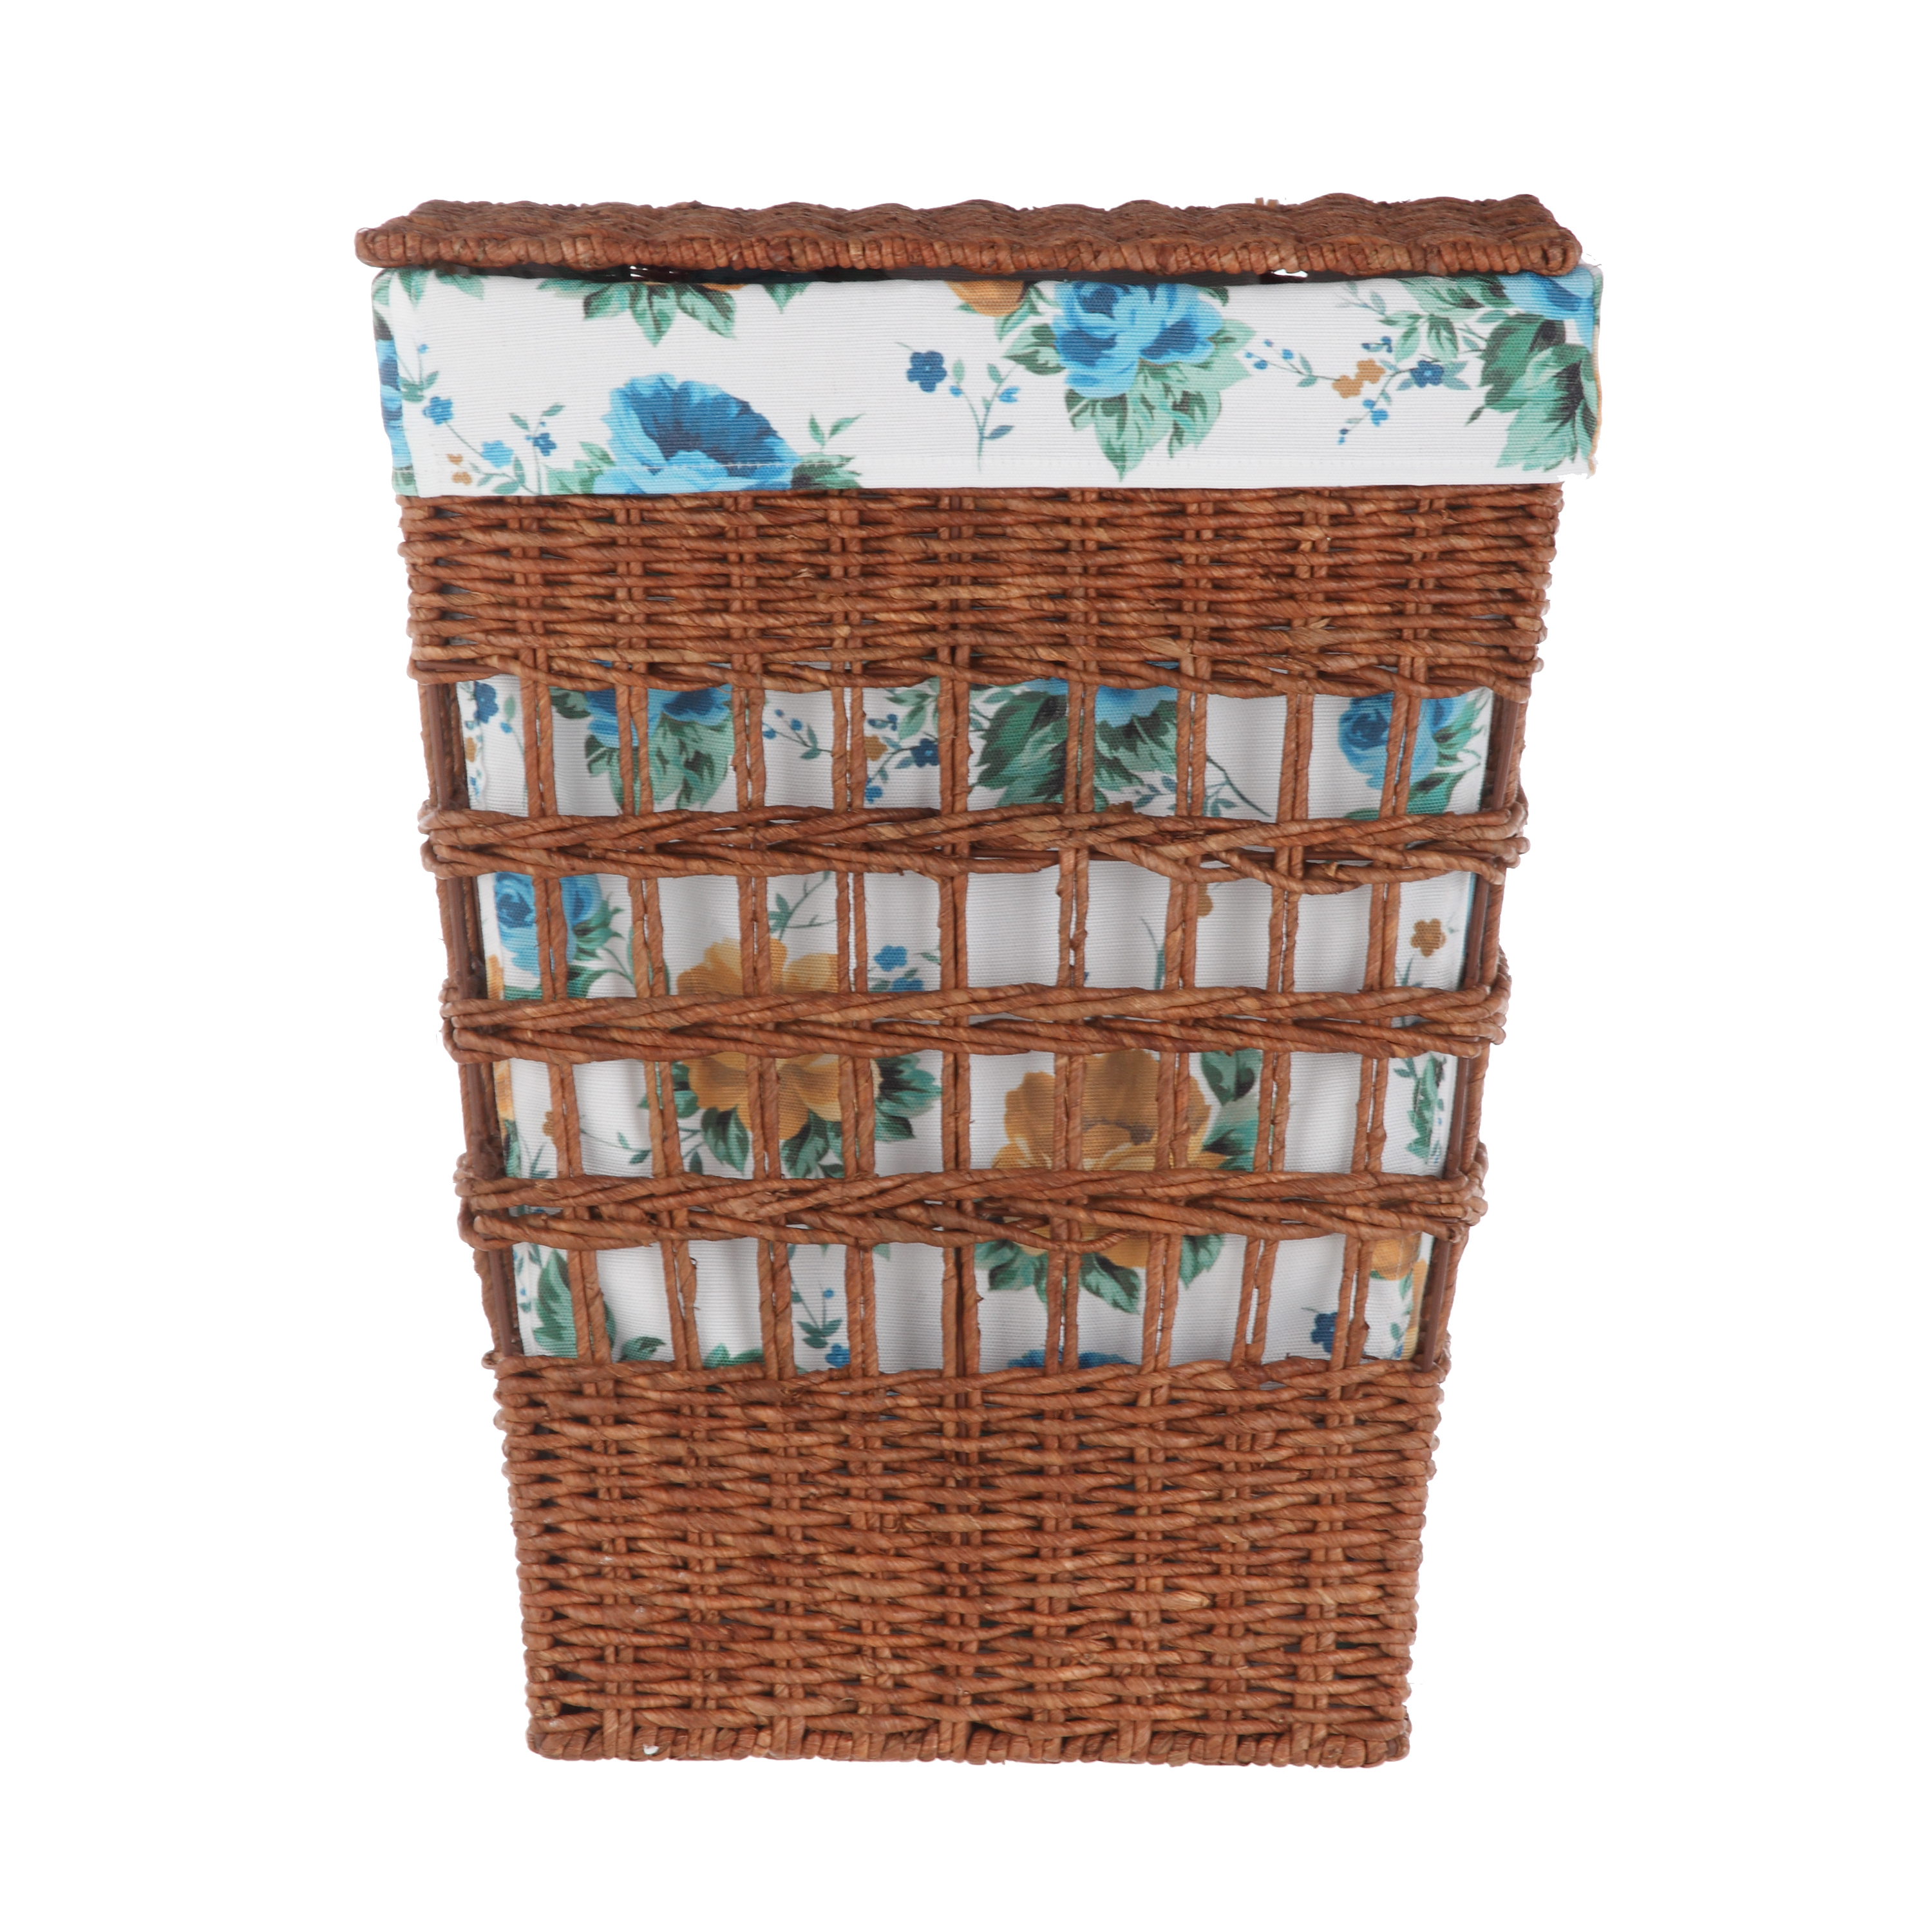 The Pioneer Woman Rose Shadow Maize Laundry Hamper - image 6 of 6